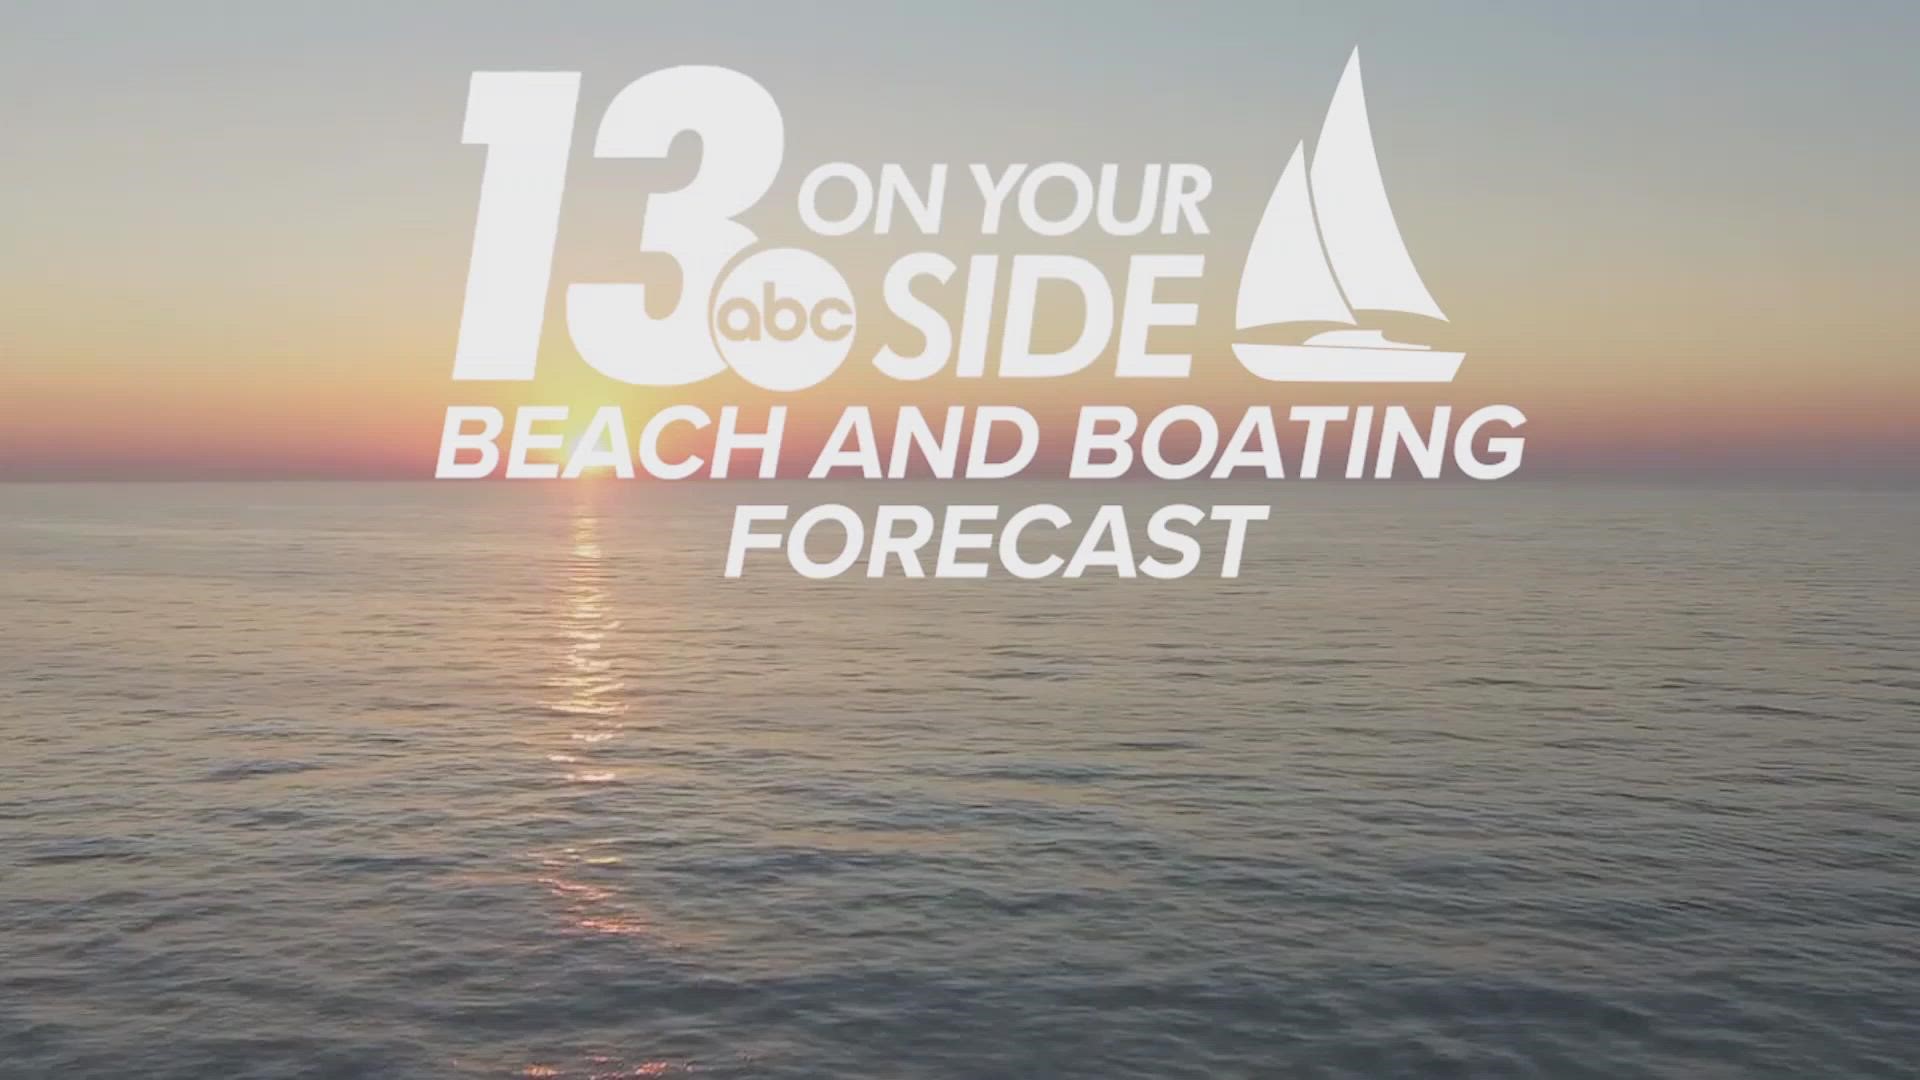 Check out the beach and boating forecast before heading out to Lake Michigan!